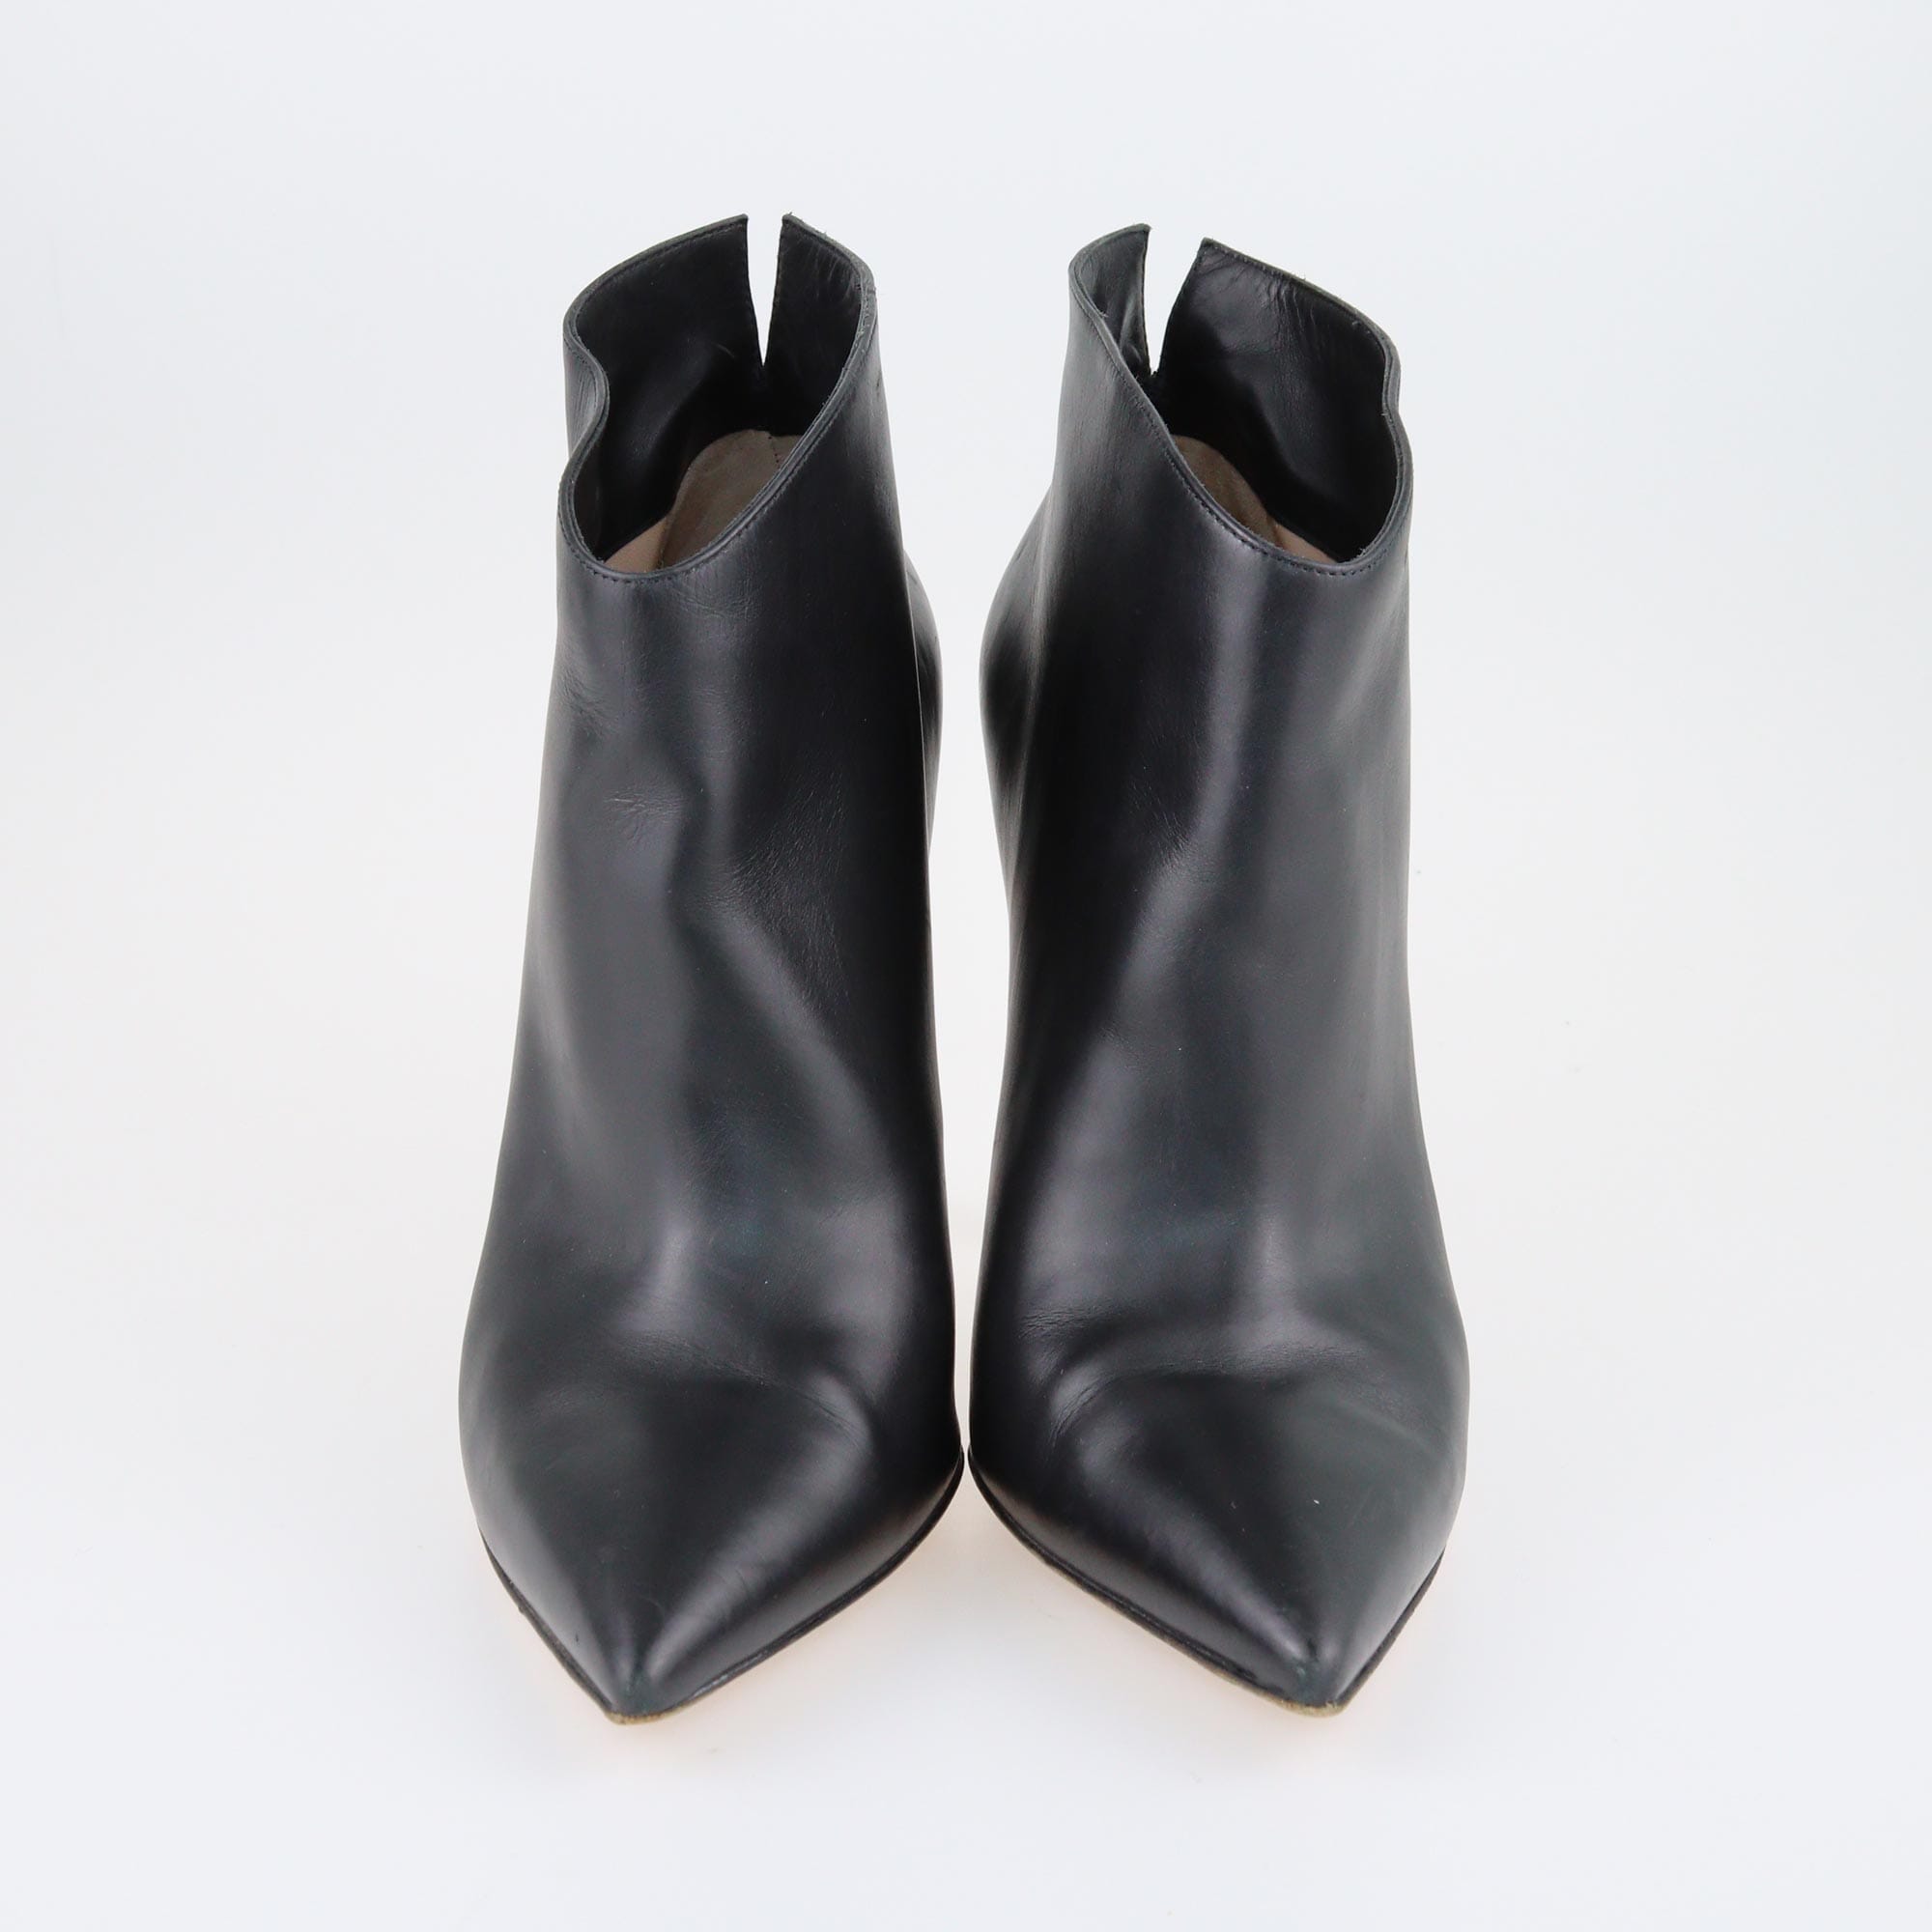 Gianvito Rossi Black Pointed Ankle Boots Shoes Gianvito Rossi 